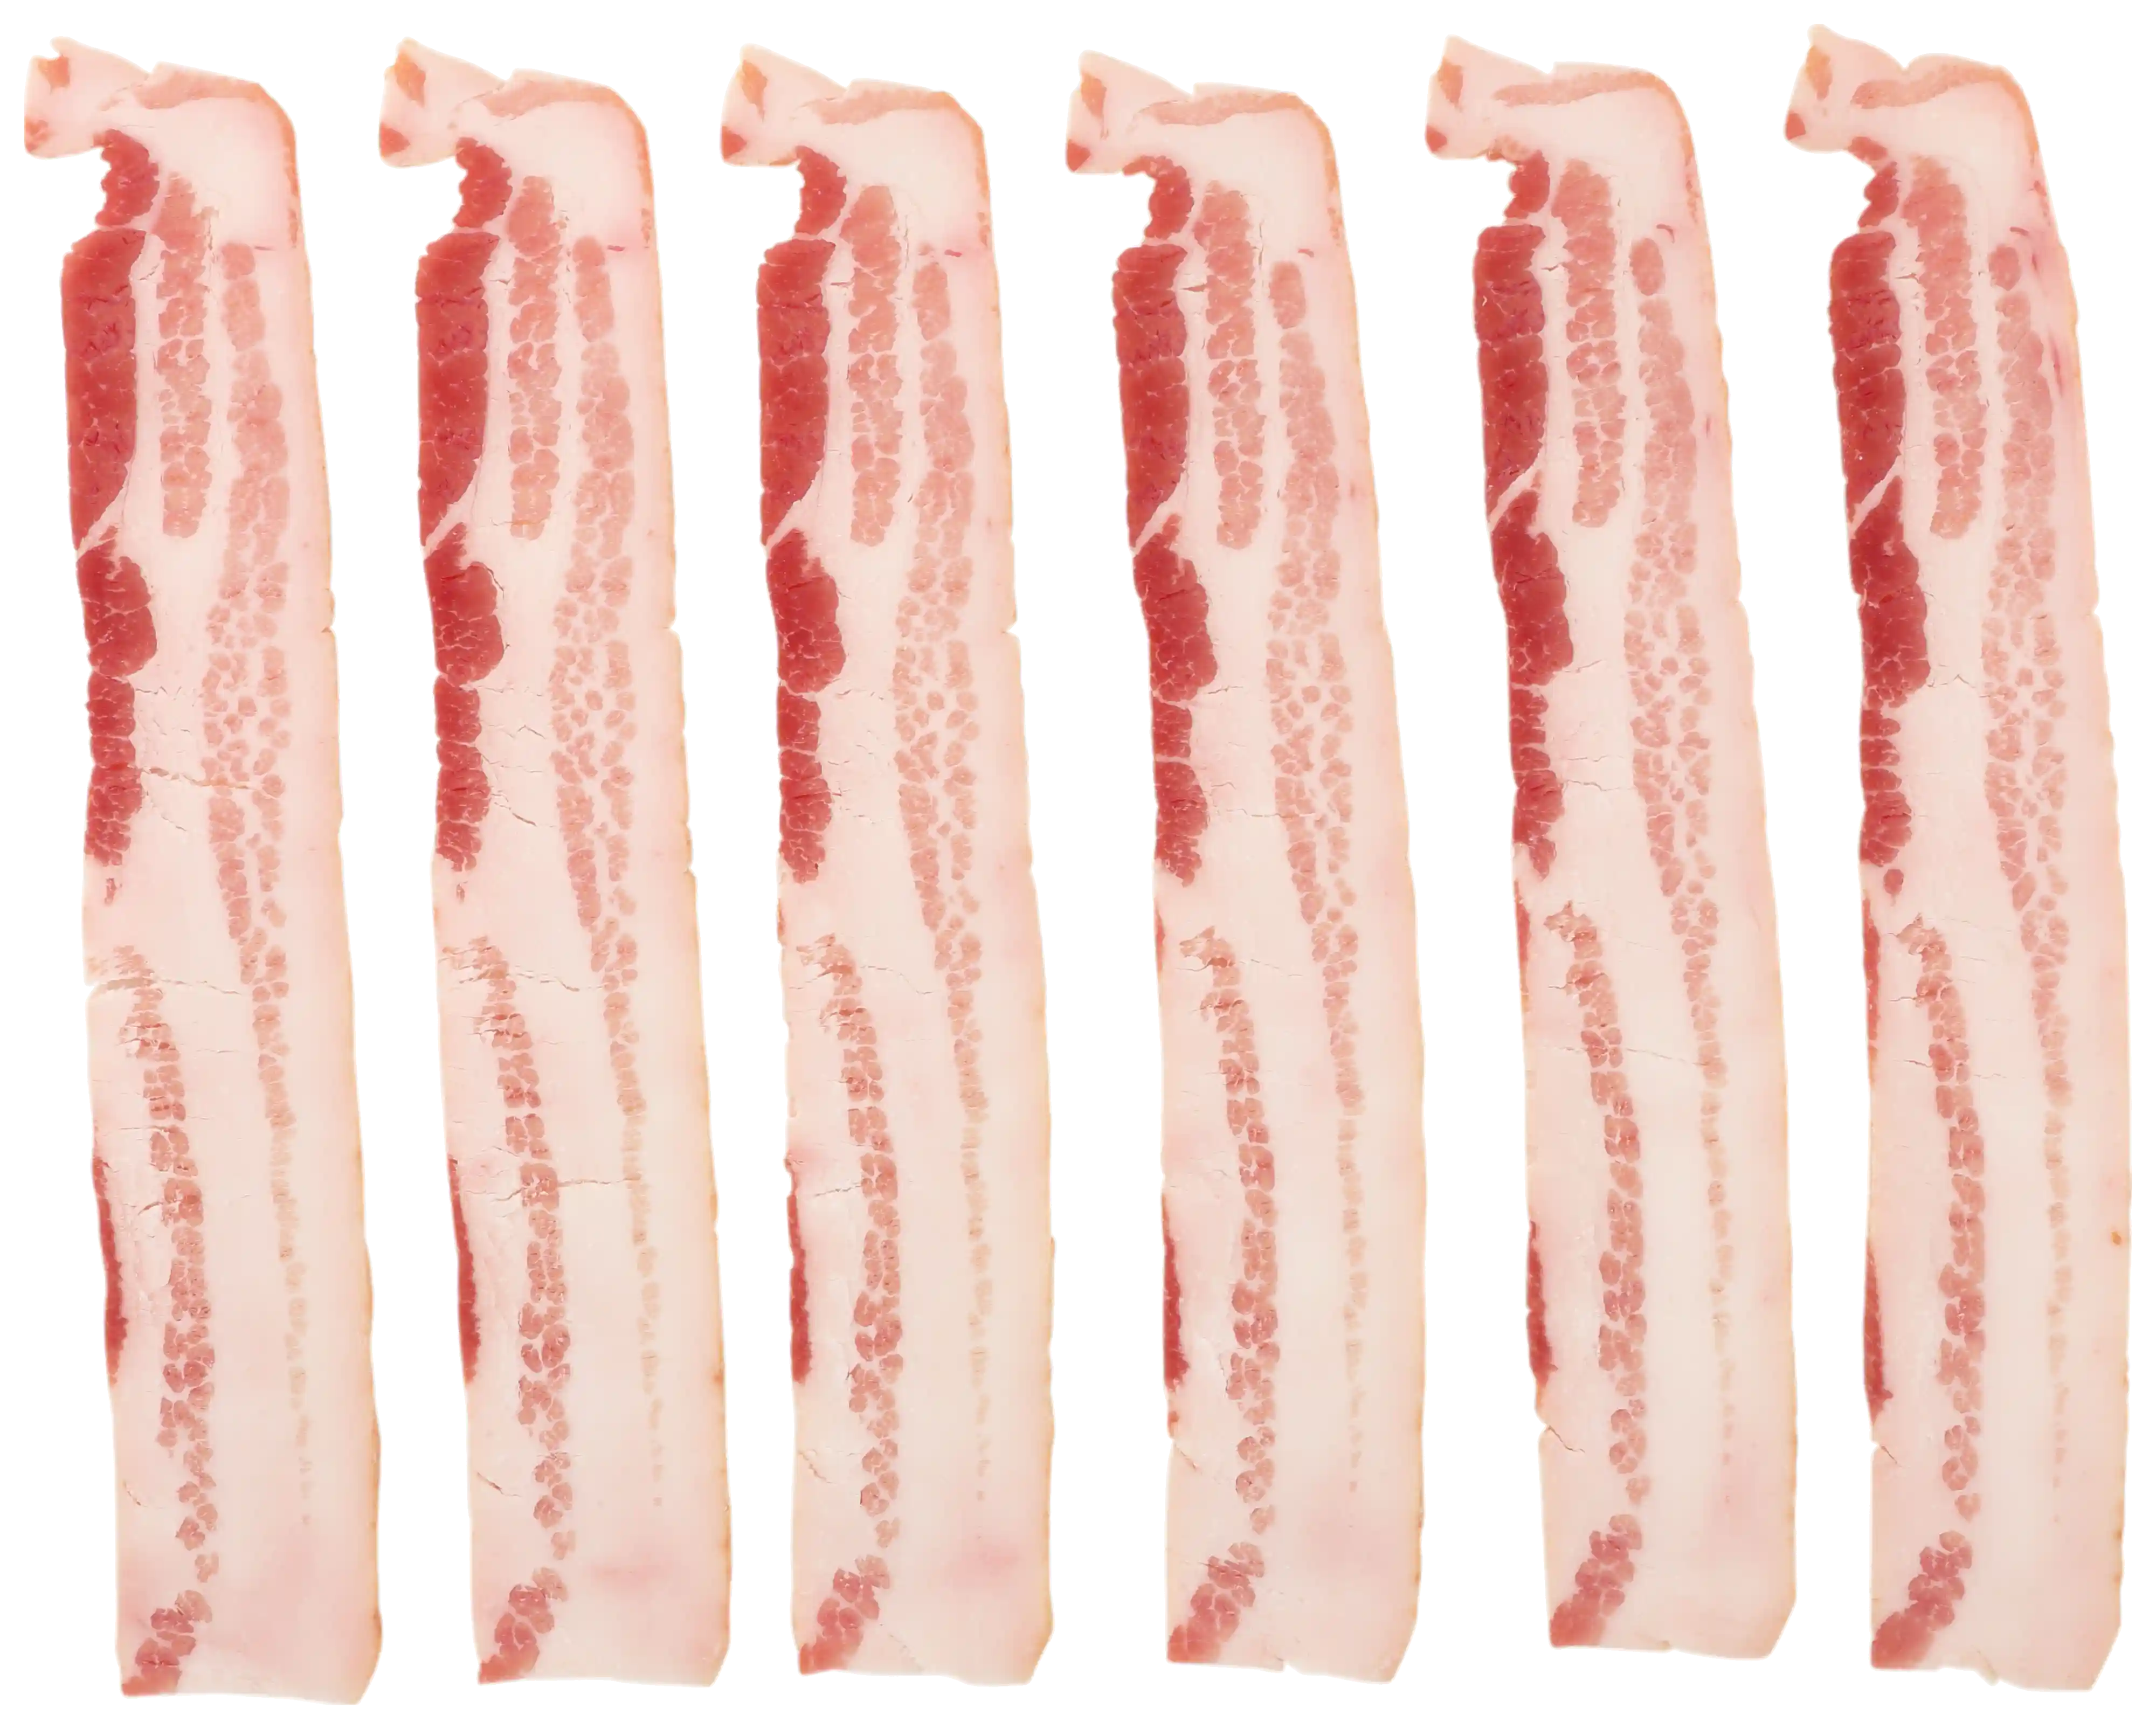 Wright® Brand Naturally Hickory Smoked Thin Sliced Bacon, Bulk, 15 Lbs, 9 Slices/Inch, Frozen_image_21